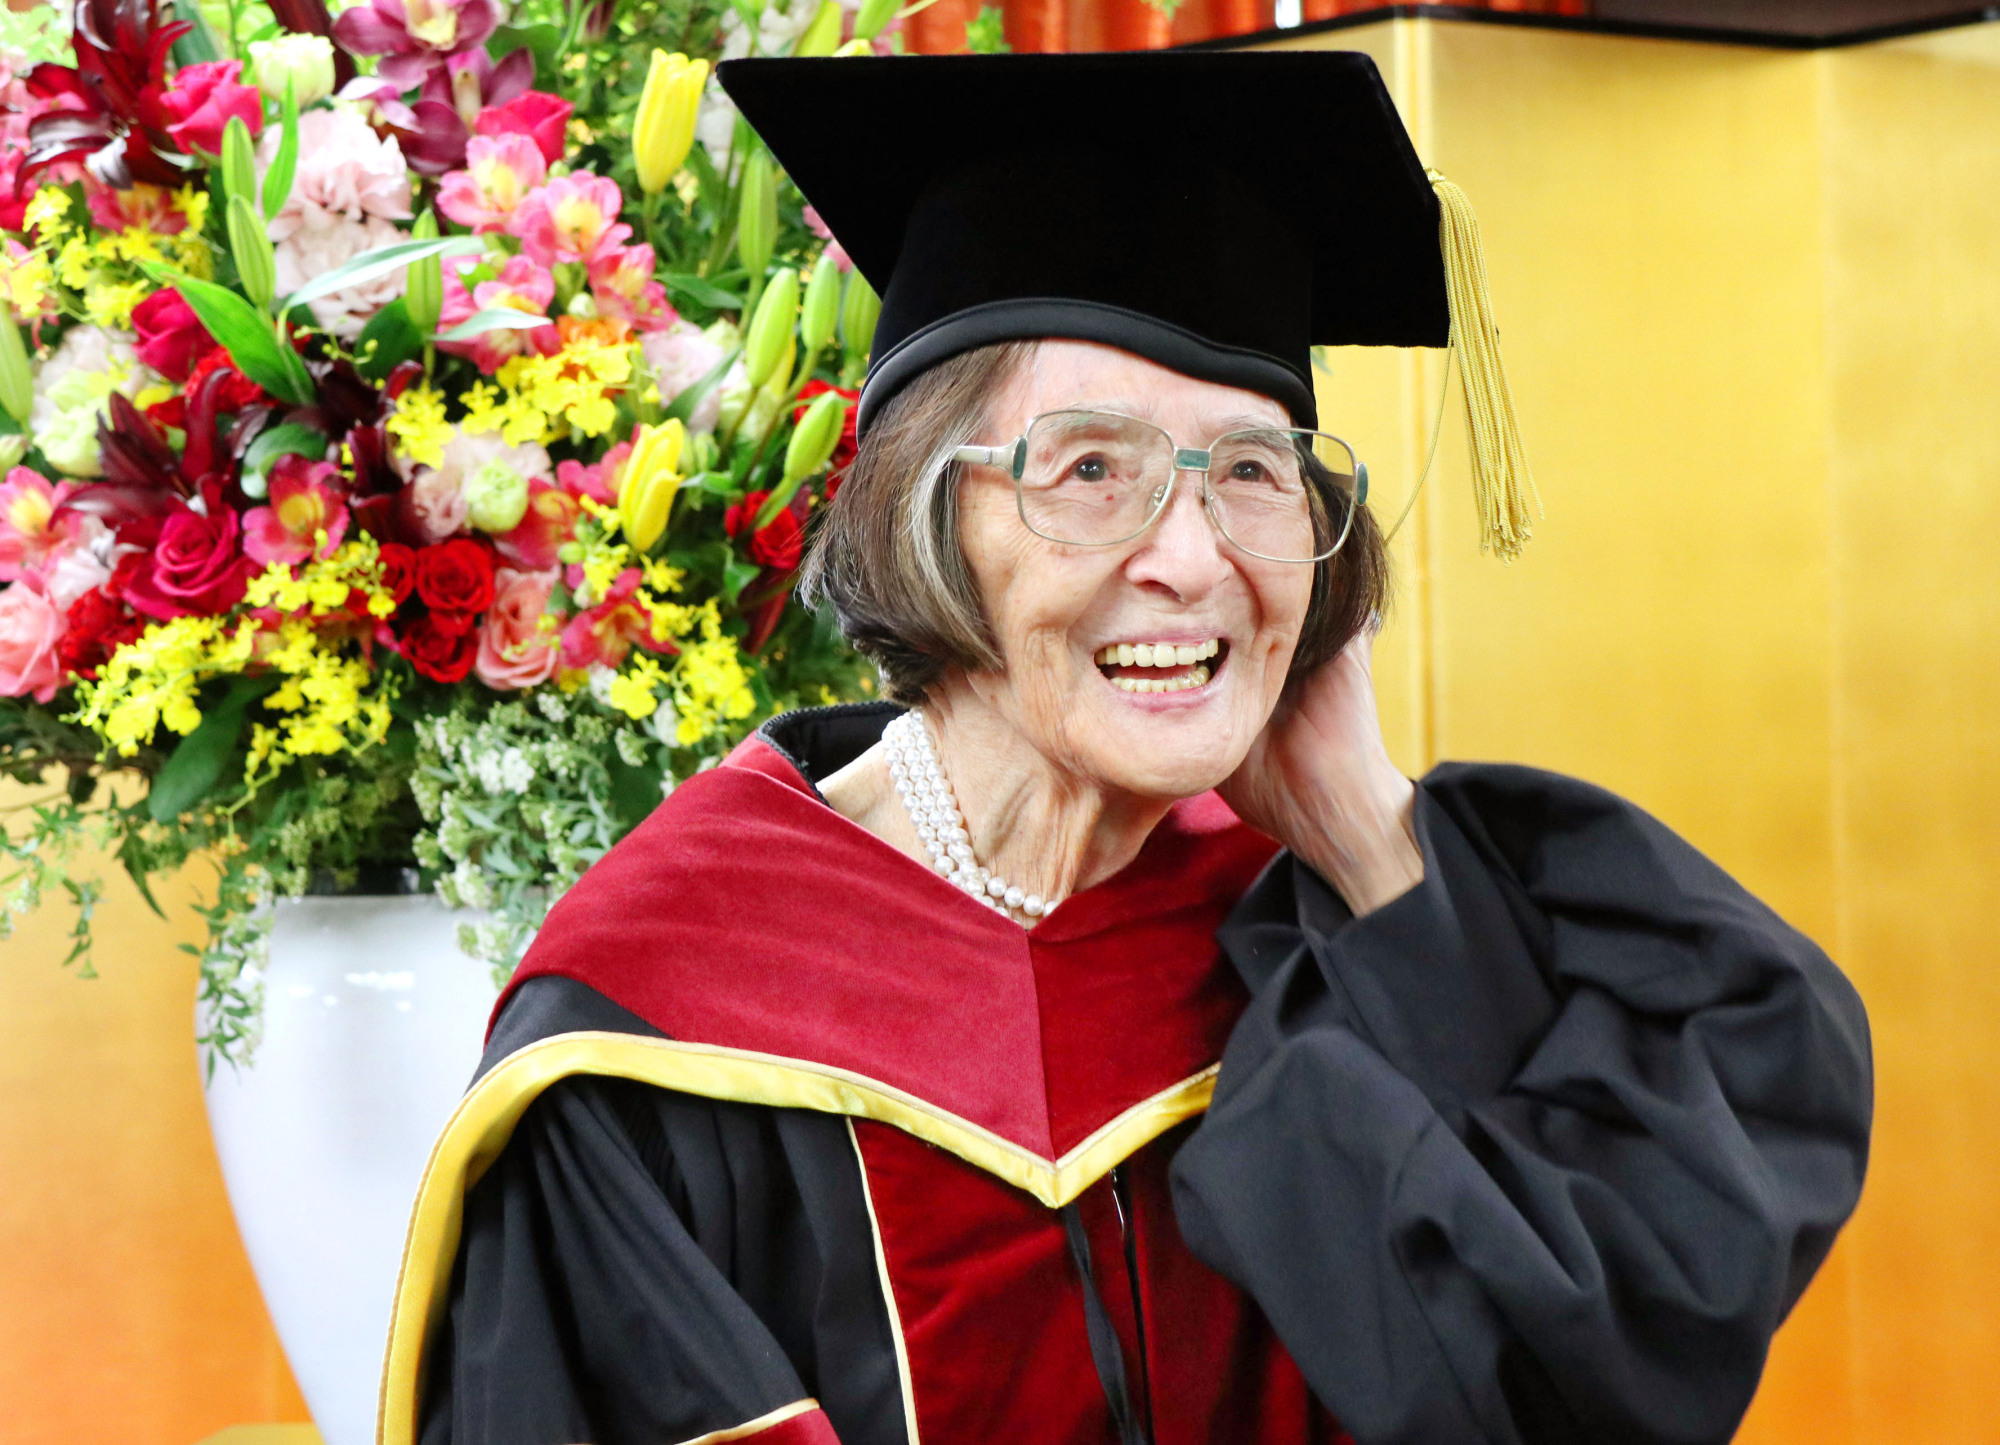 Kiyoko Ozeki, 88, who became the oldest person to earn a doctoral degree in Japan on Saturday, attends a ceremony at Ritsumeikan University in Kyoto. | KYODO